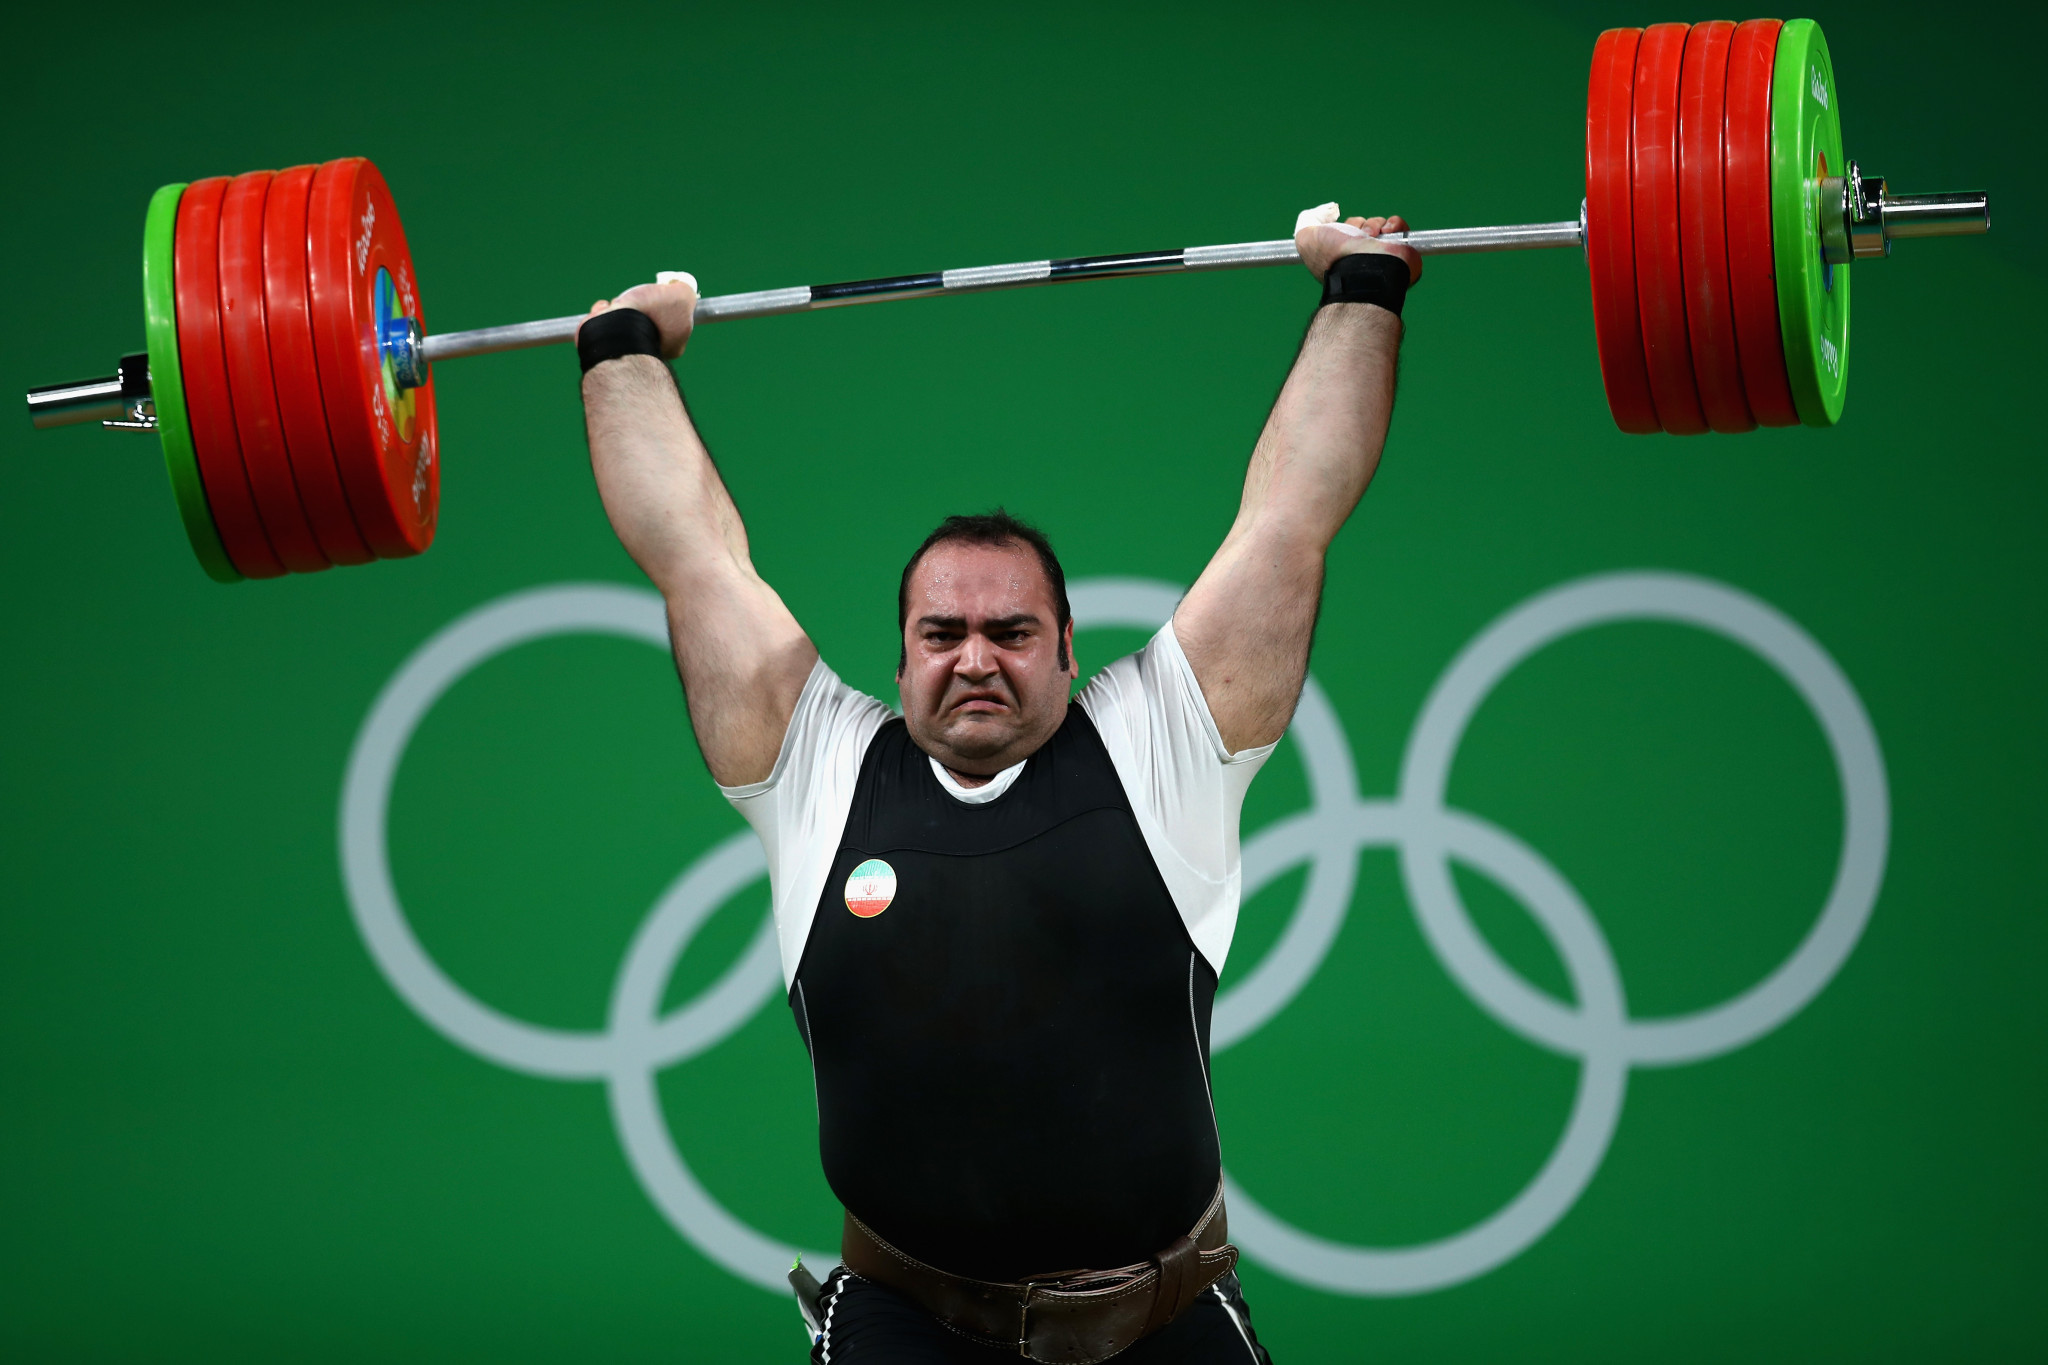 London 2012 Olympic gold medallist Behdad Salimi is one of Iran's star weightlifters ©Getty Images